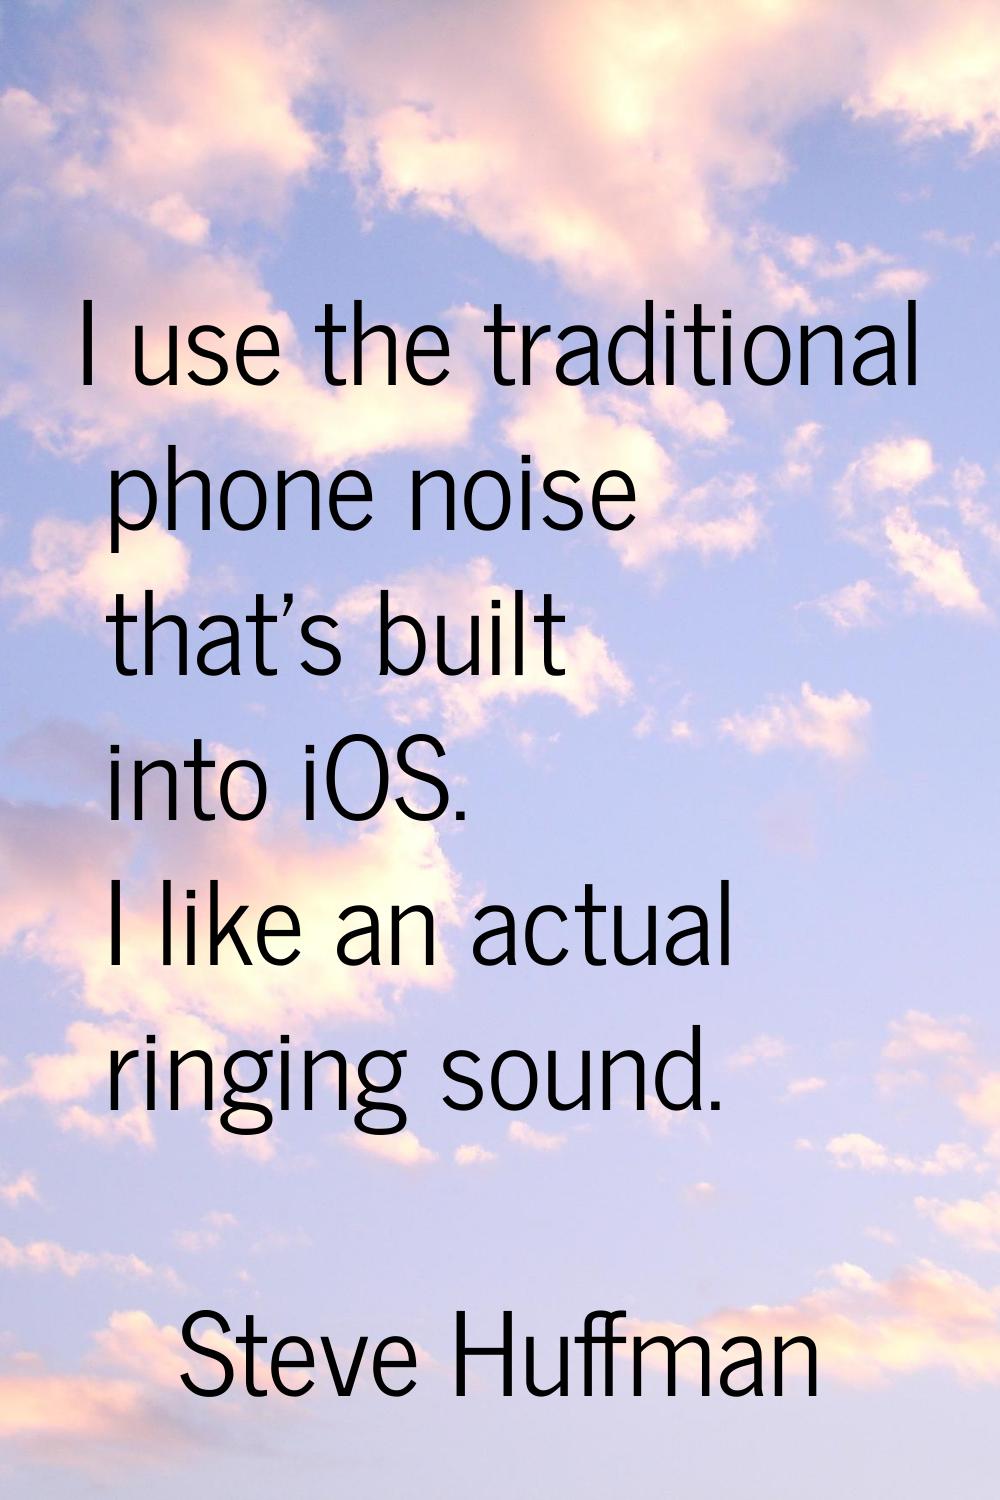 I use the traditional phone noise that's built into iOS. I like an actual ringing sound.